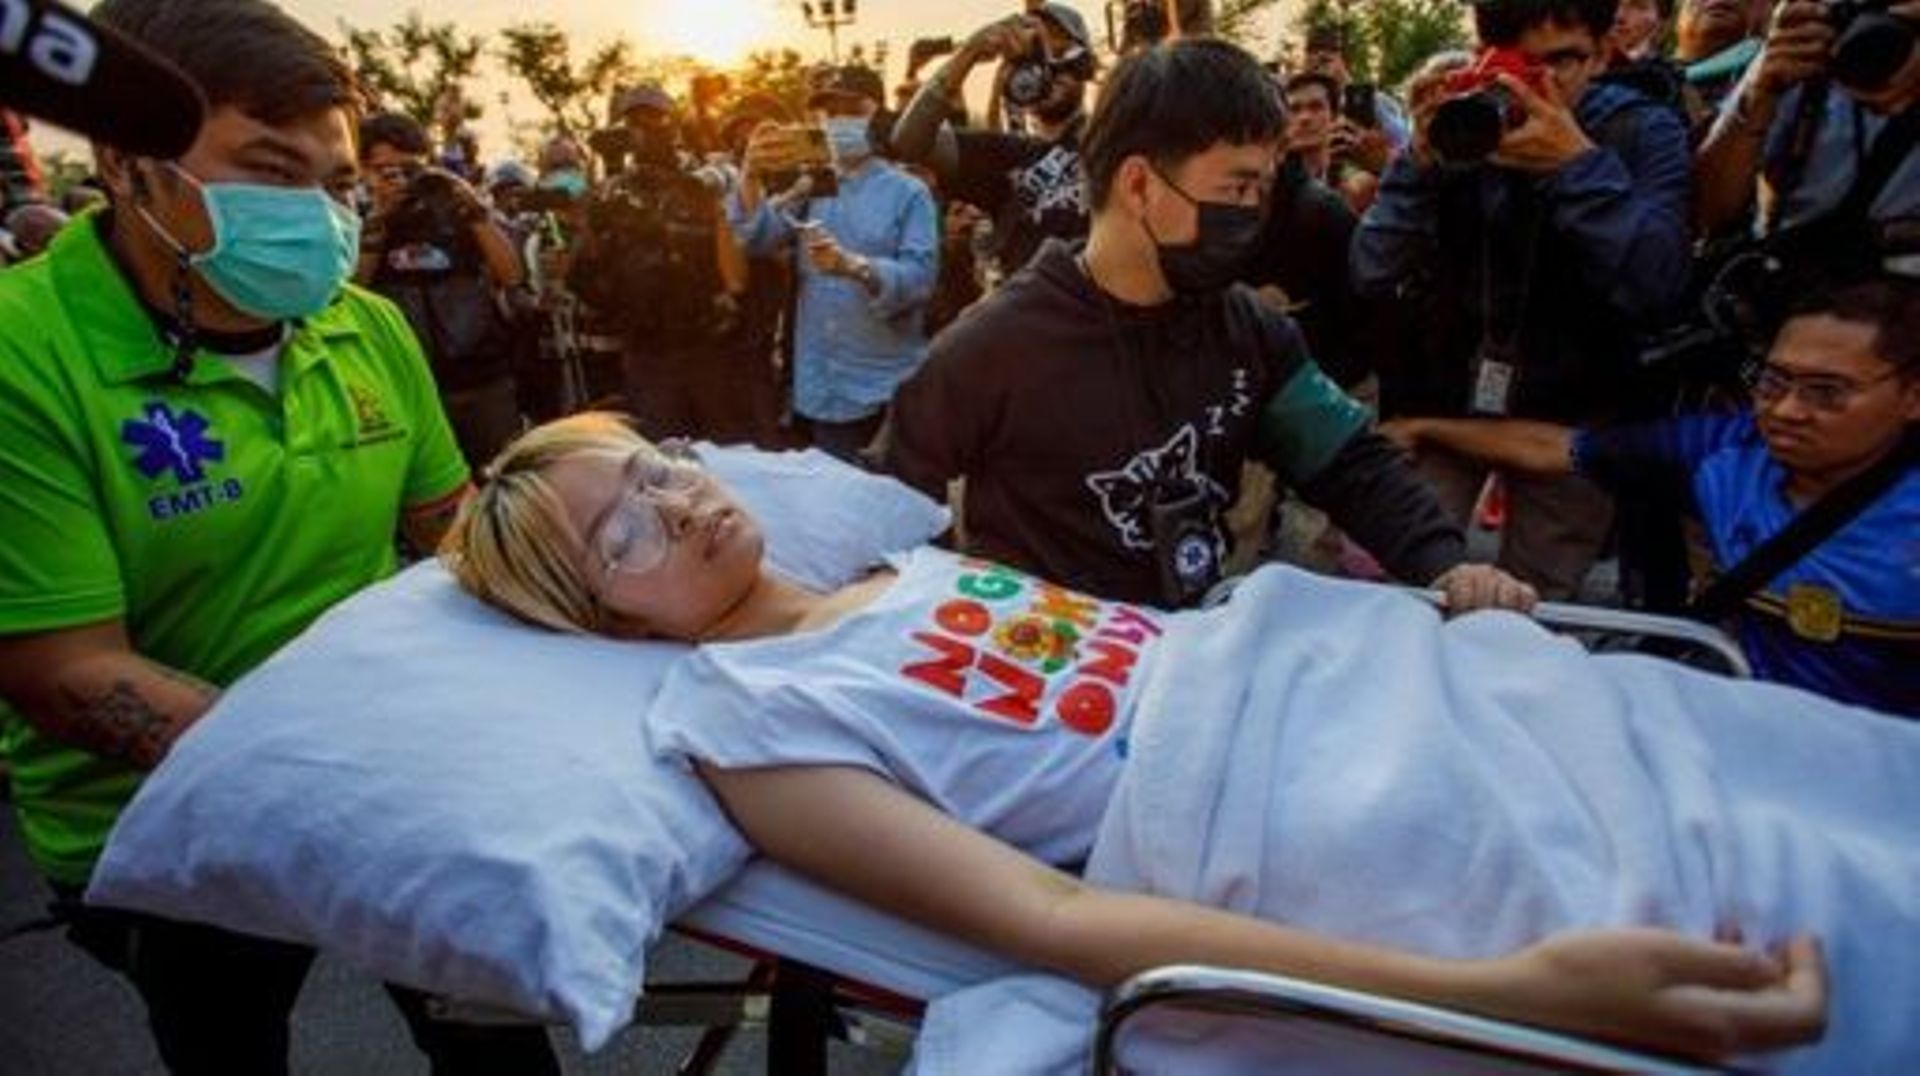 This photo taken on February 24, 2023 shows Thai political activist Orawan "Bam" Phuphong being transported on a stretcher to continue a hunger strike outside Thailand’s Supreme Court after being released from Thammasat Hospital in Bangkok. Thai political